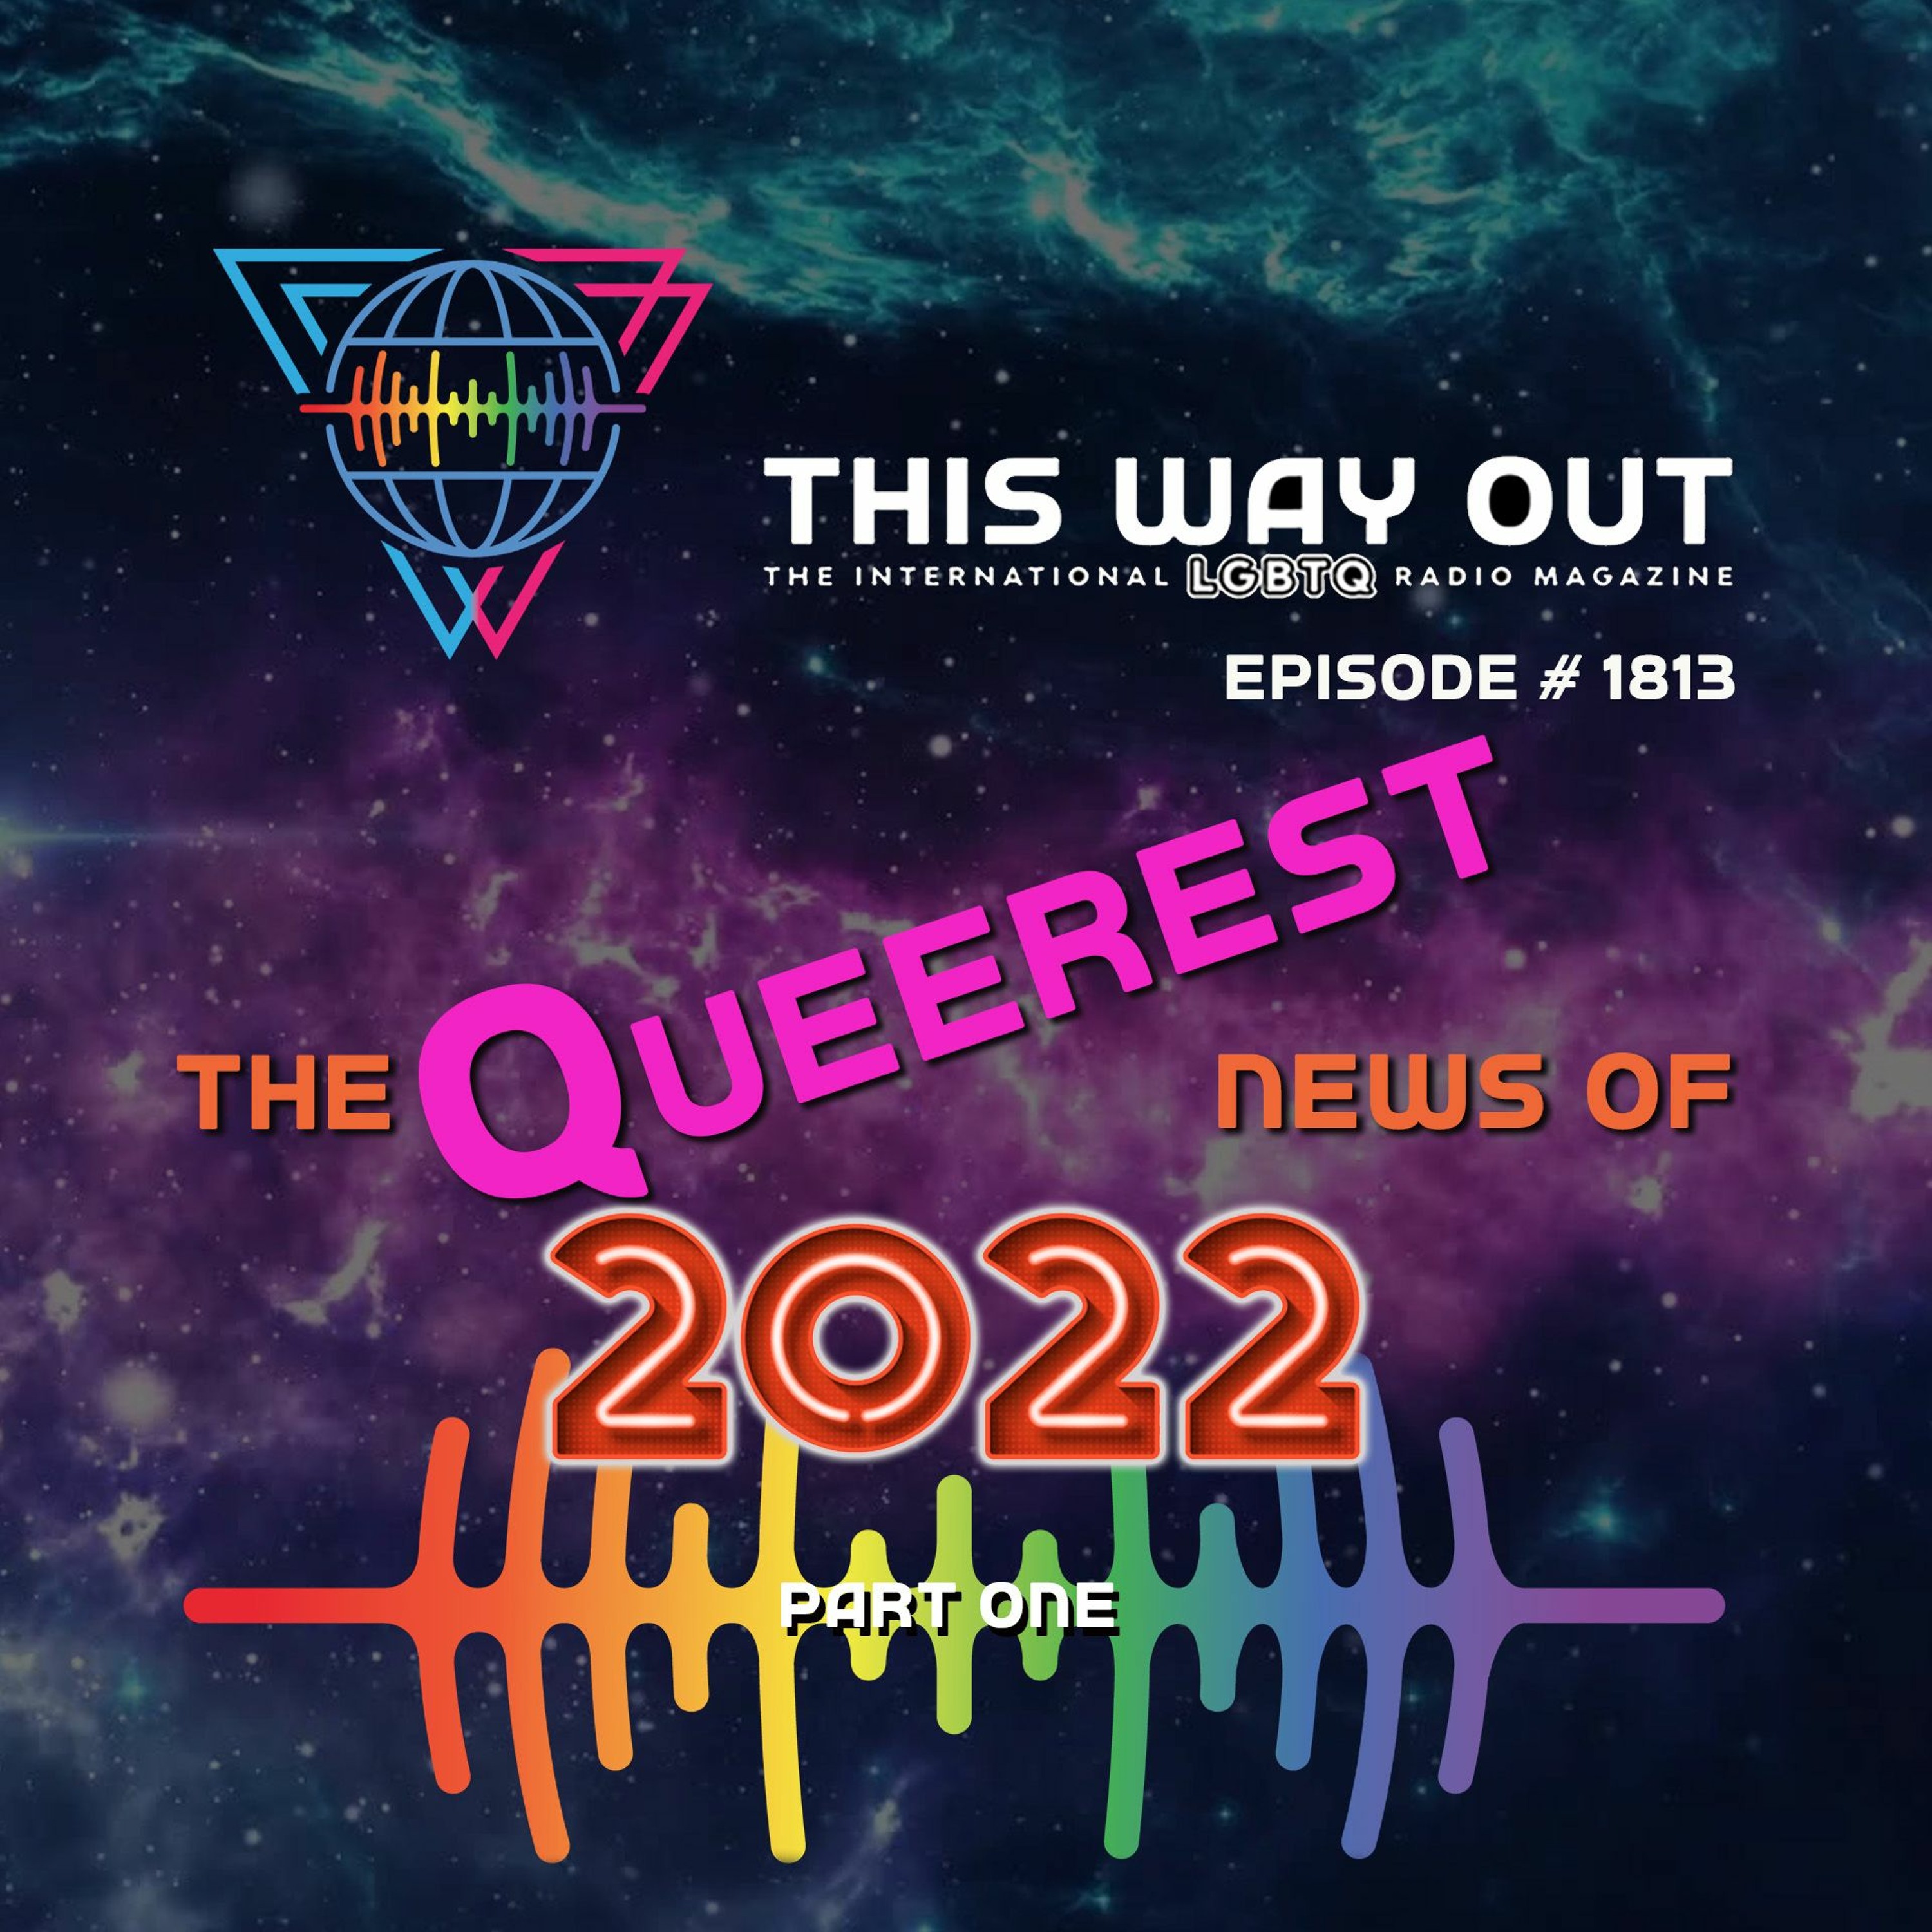 The Queerest News of 2022 (pt.1)